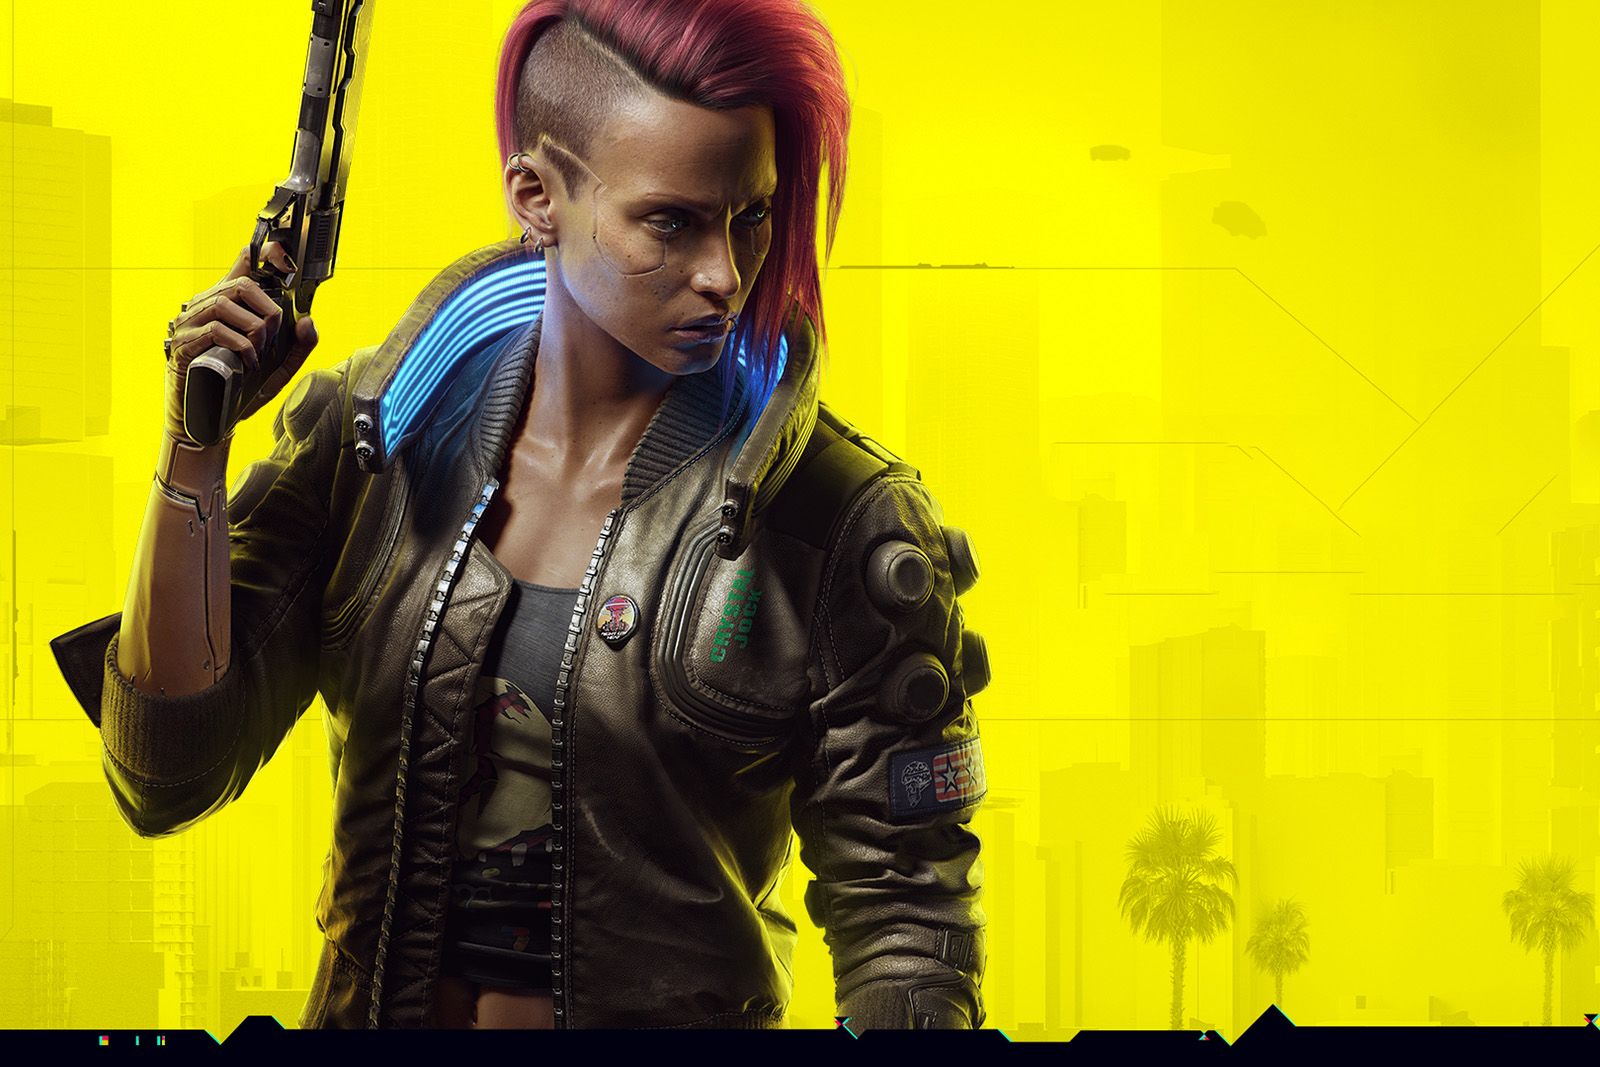 Next Cyberpunk 2077 patch delayed due to hack attack photo 3